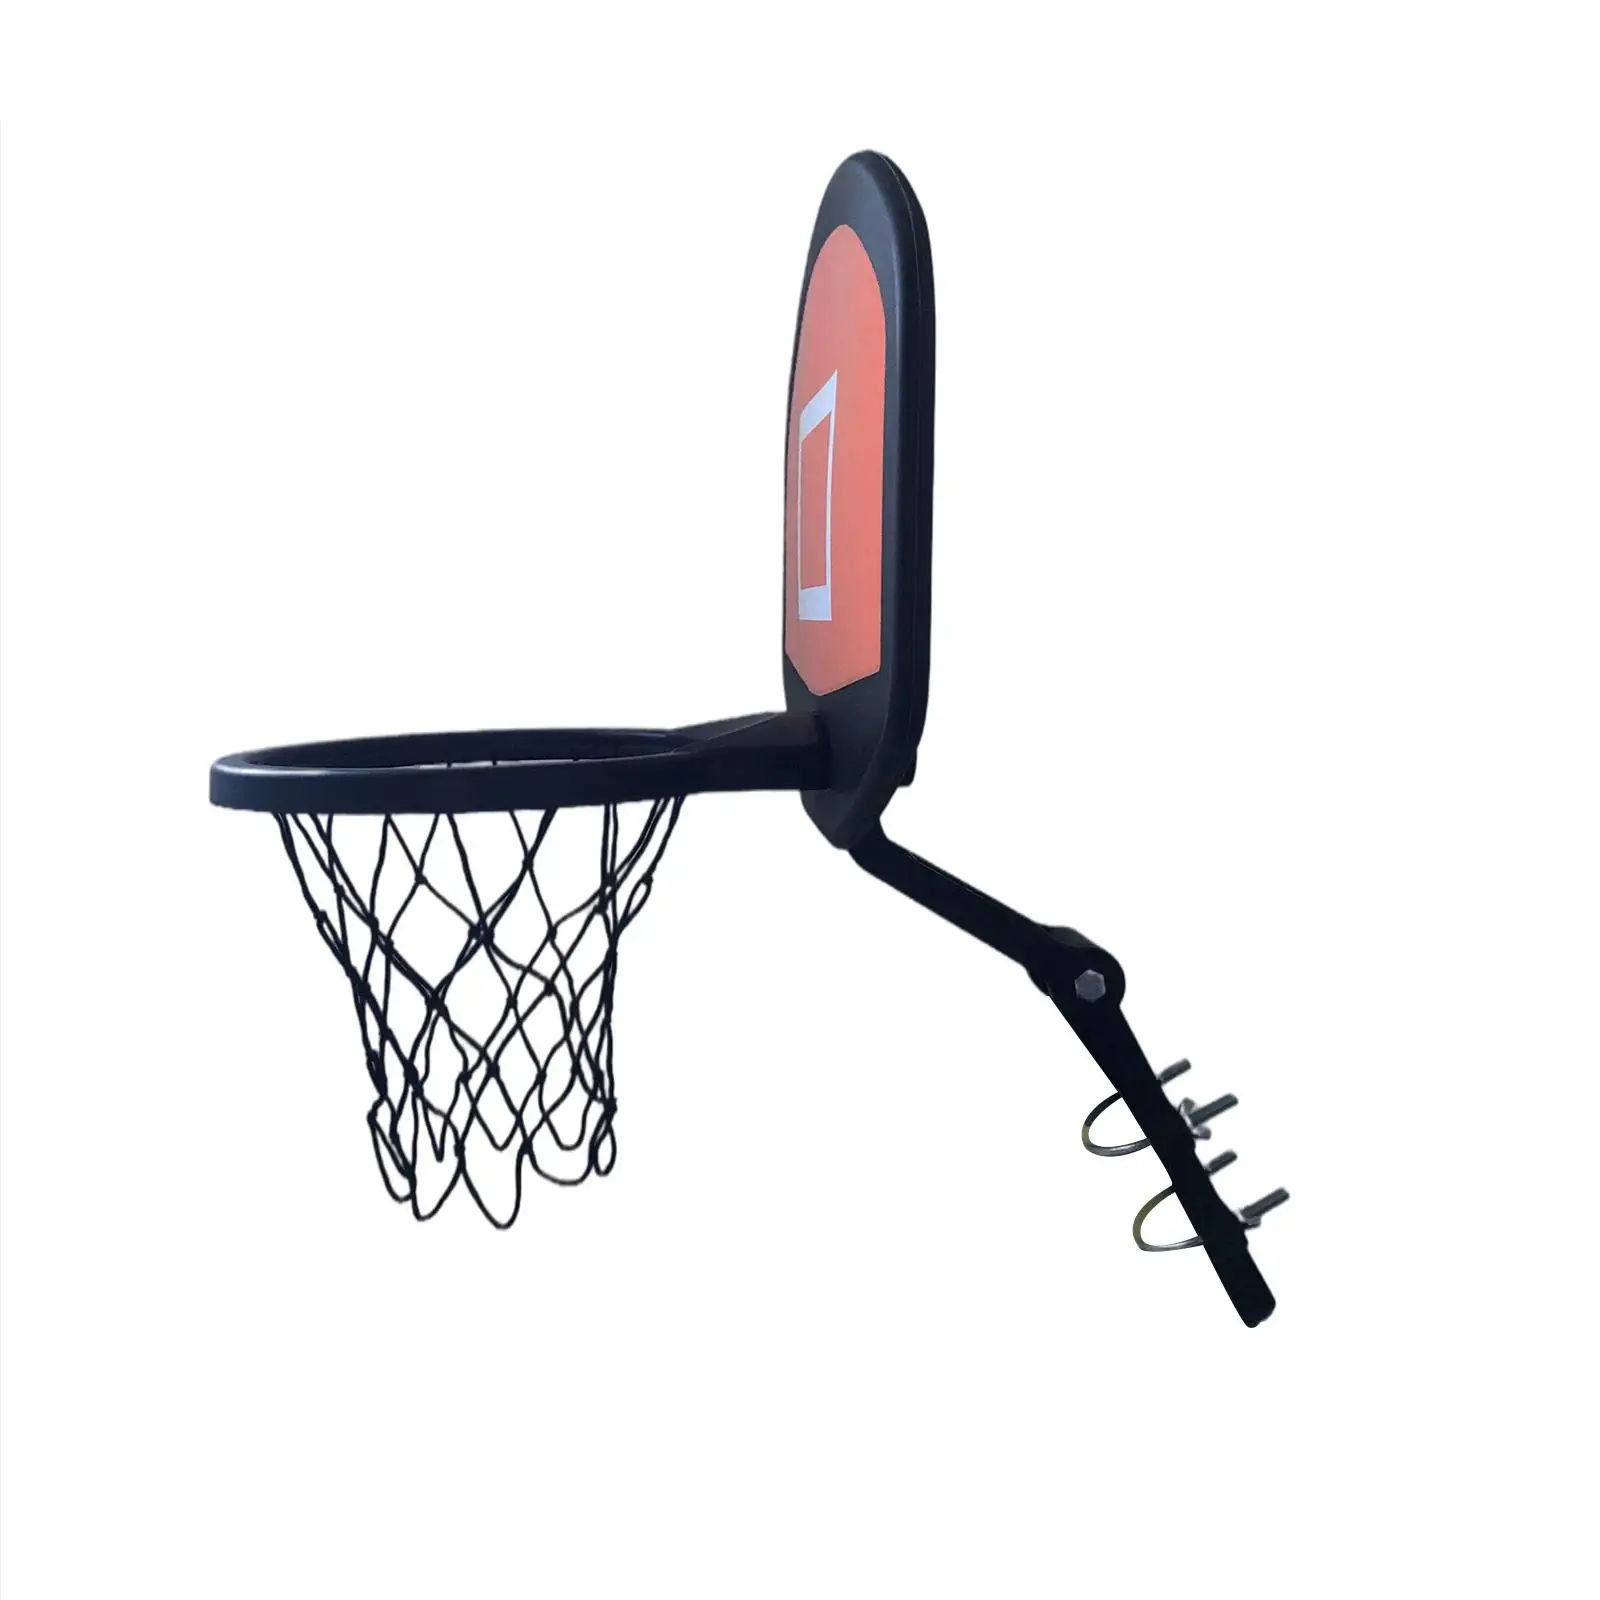 Basketball Hoop for Trampoline Toy Trampoline Accessories Basketball Backboard for Curved Pole Indoor Backyard Kids Outside